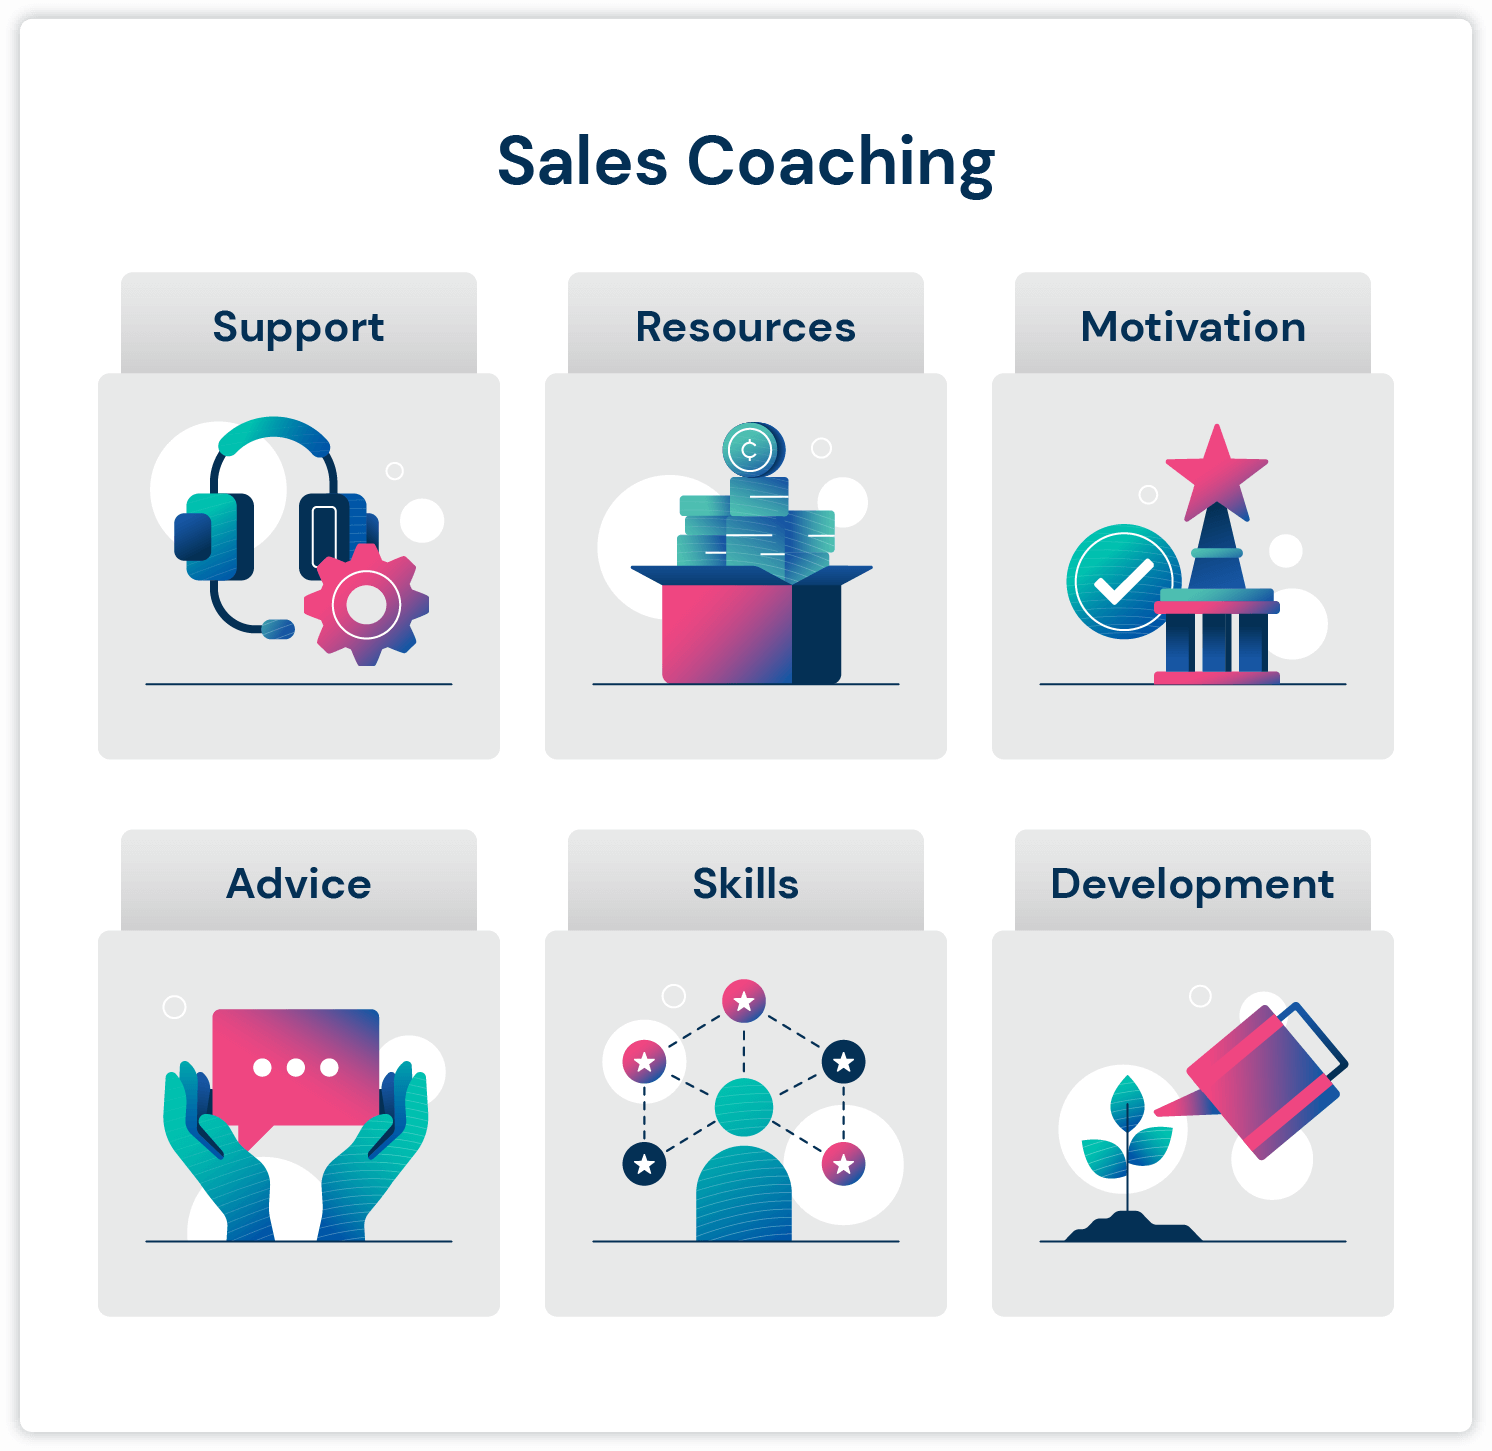 Sales coaching infographic showing why you need sales coaching: support, resources, motivation, advice, skills, and development.